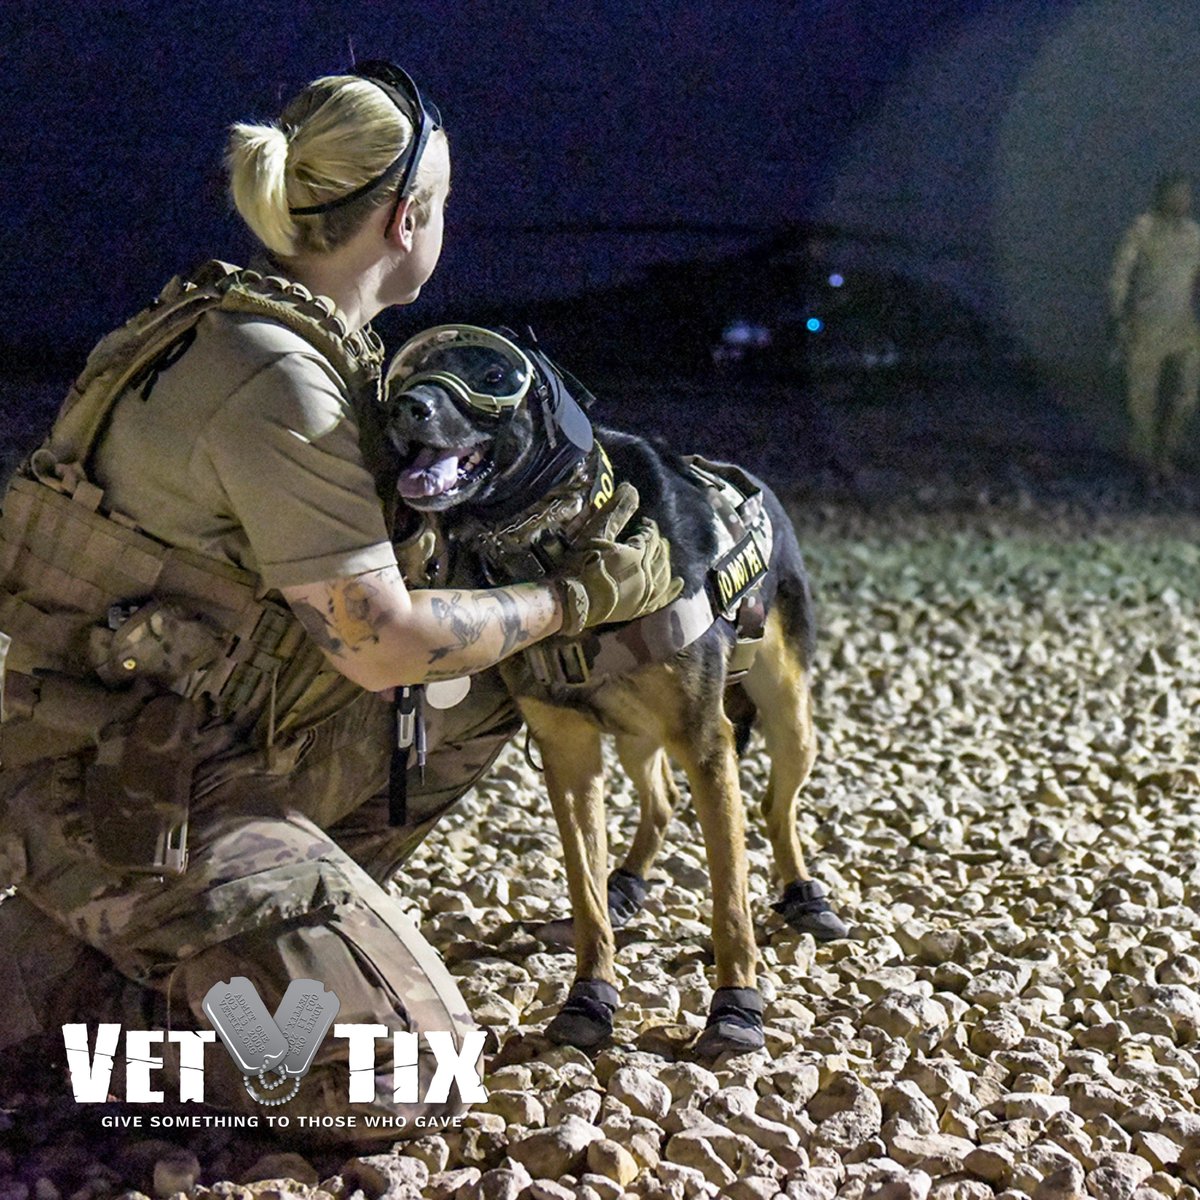 National #K9 #Veterans Day. Today we honor commemorate the service and sacrifices of American military and working dogs. Photo By: Air Force Staff Sgt. Noah Tancer. #MemoryMaker